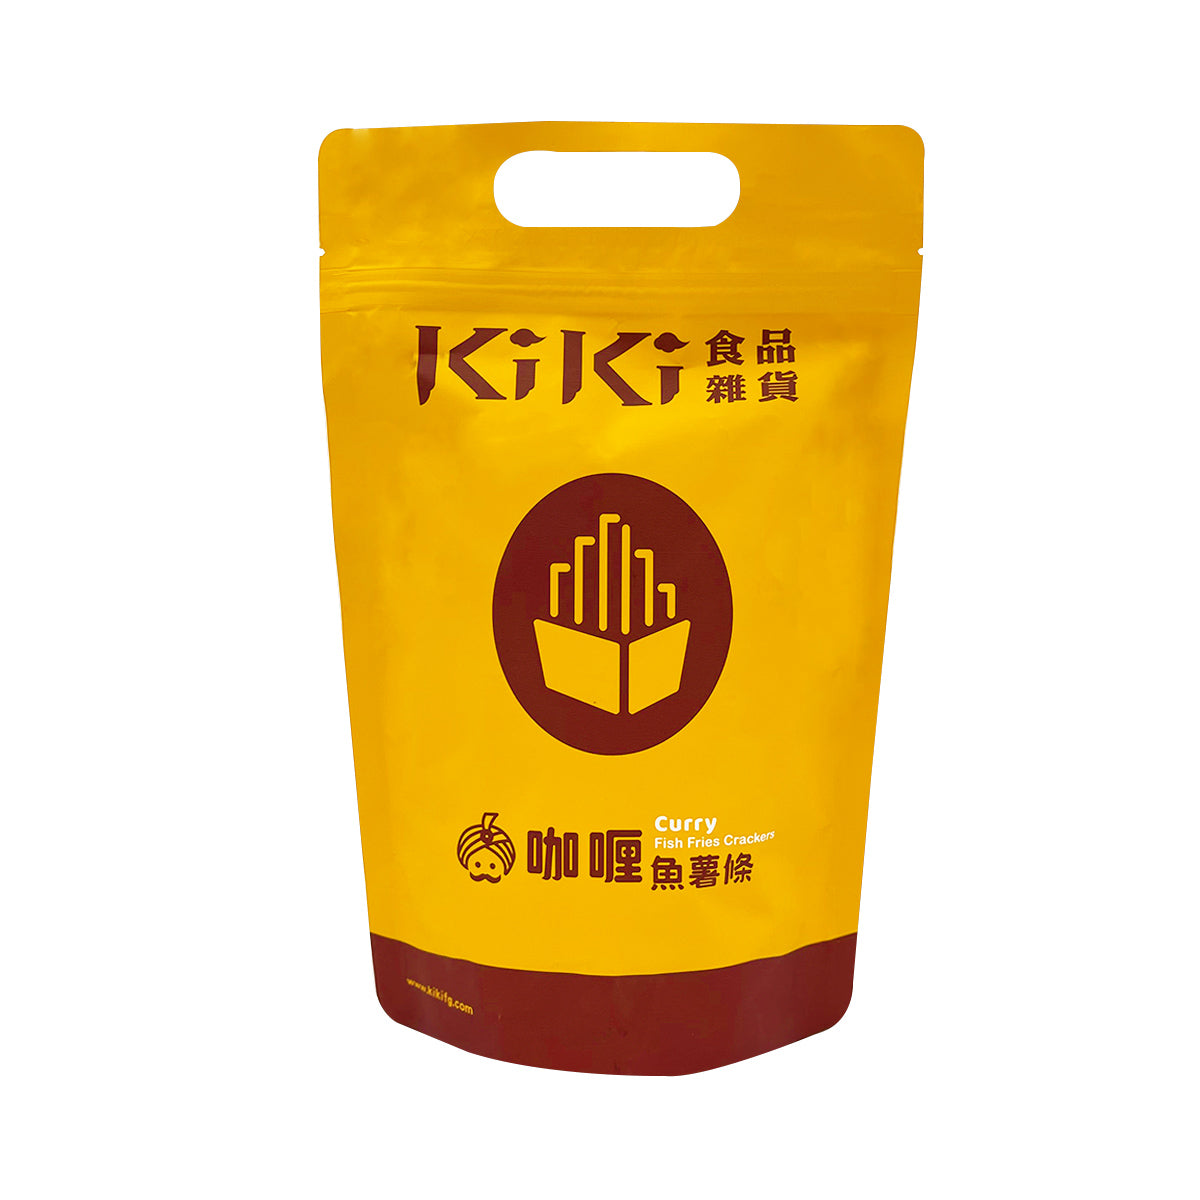 【KIKI FINE GOODS】Curry Fries Crackers 80g